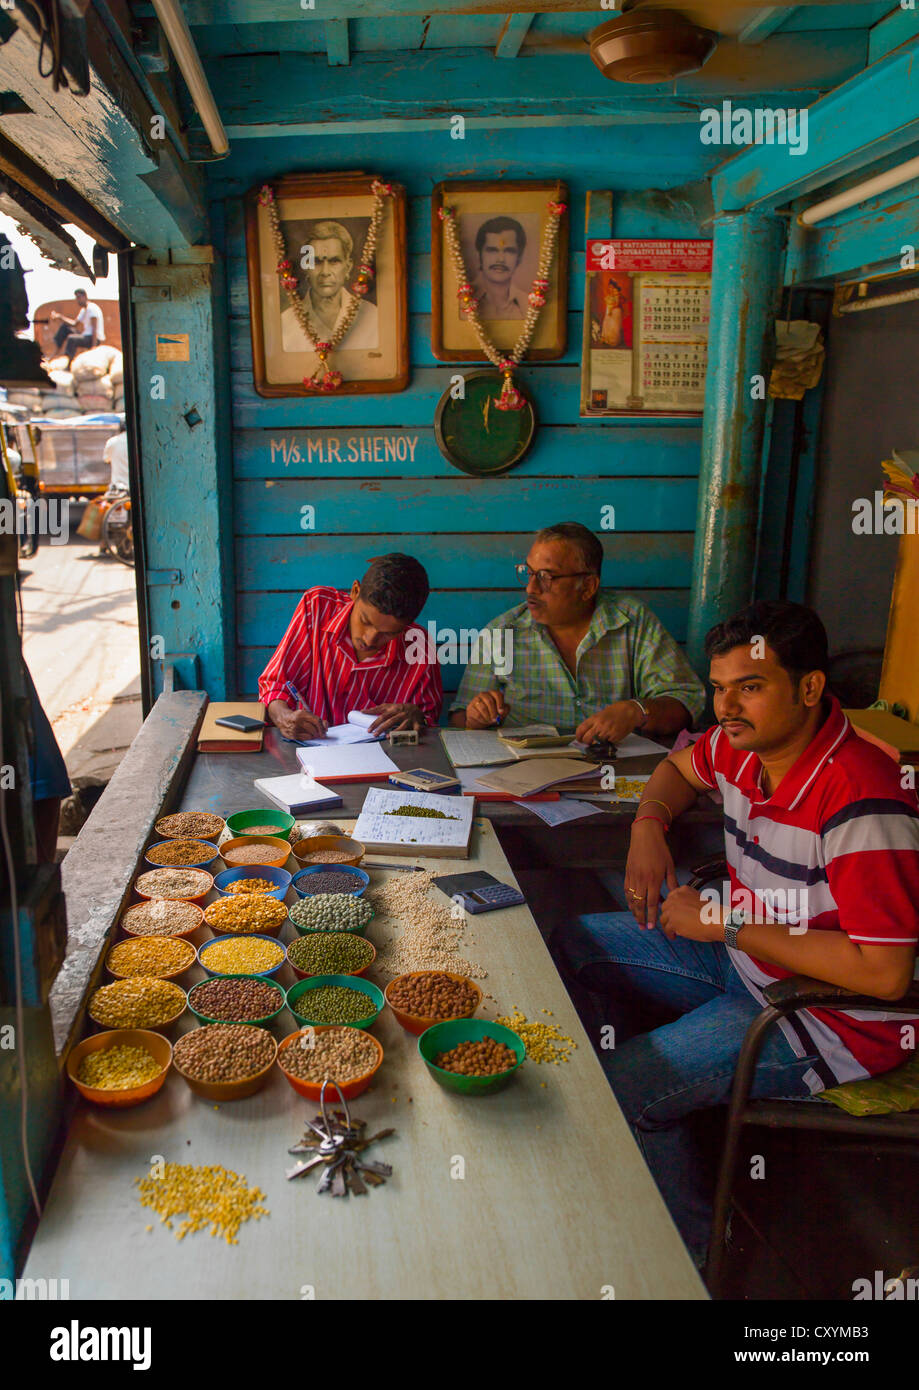 Sellers Of Grains Working On Their Business Behind Their Stalls In Their Store, Kochi, India Stock Photo